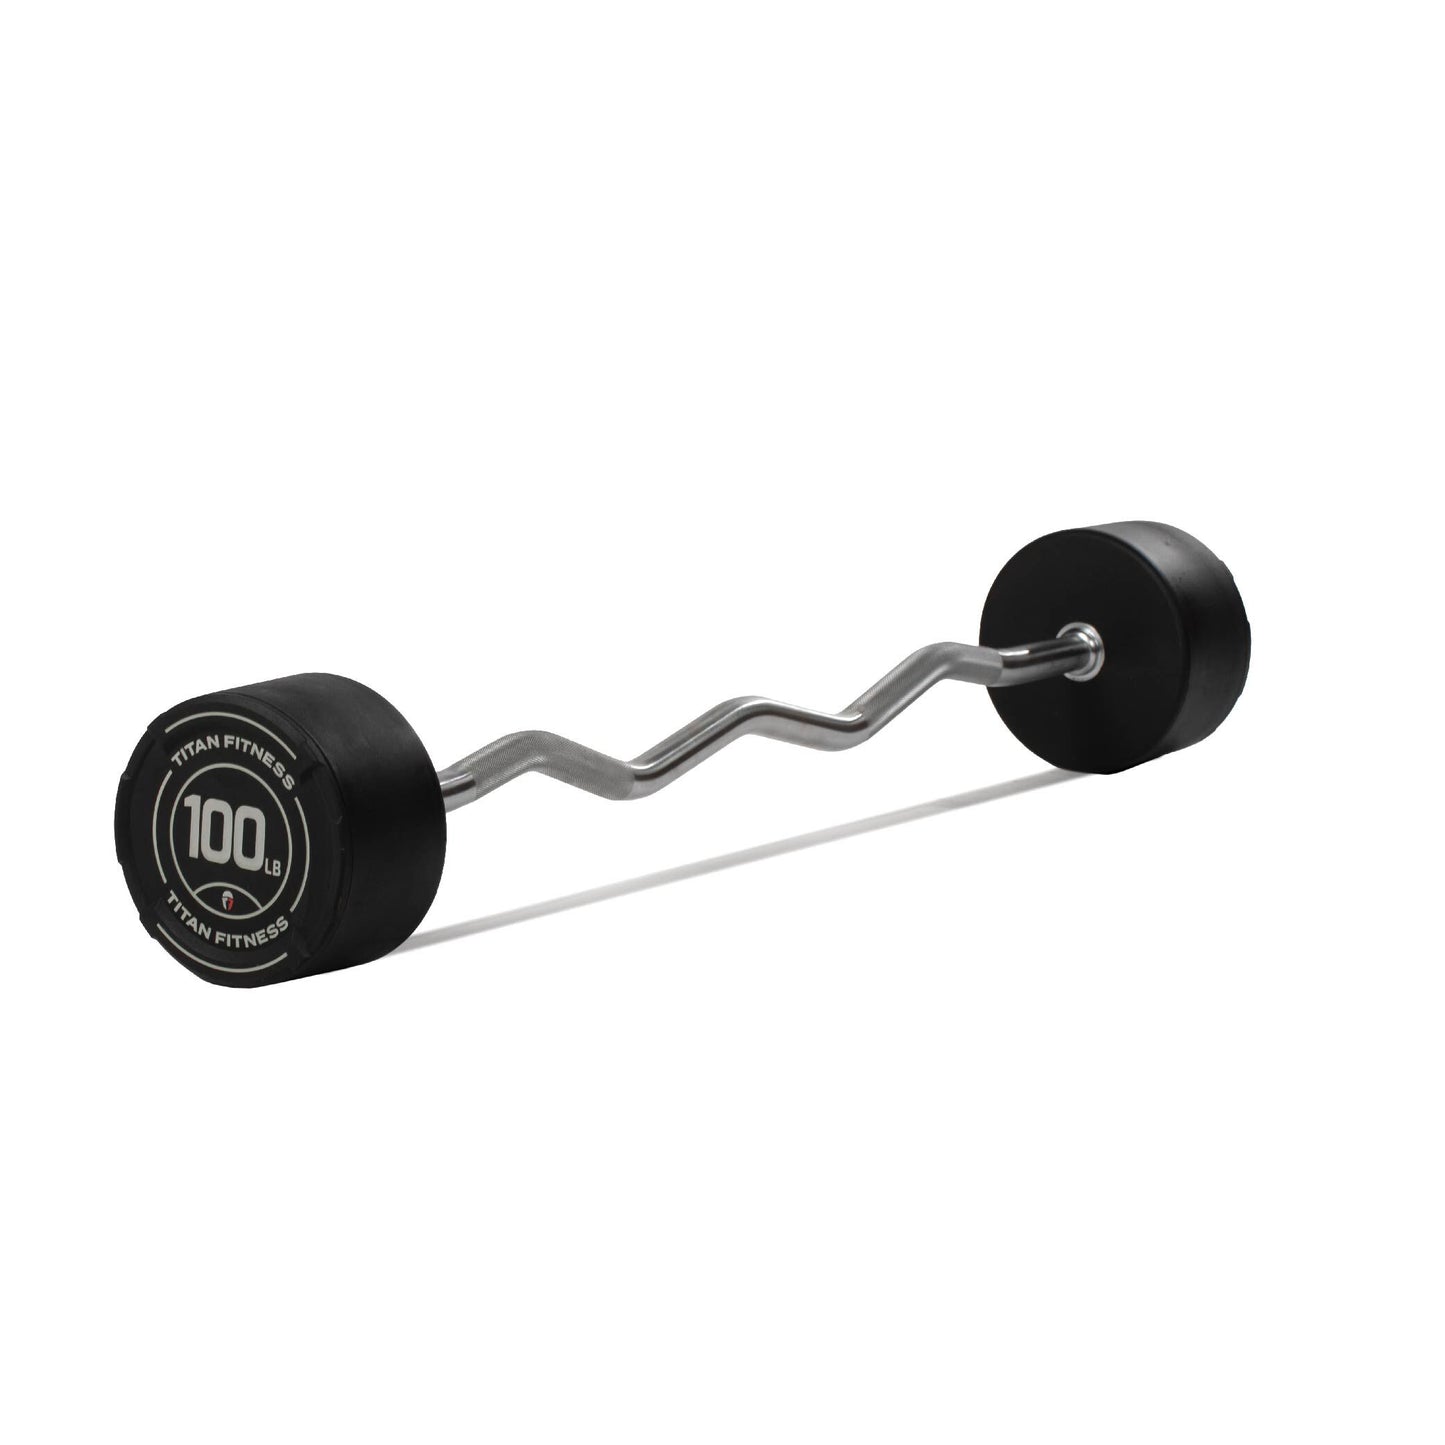 100 LB EZ Curl Fixed Rubber Barbell - view 1